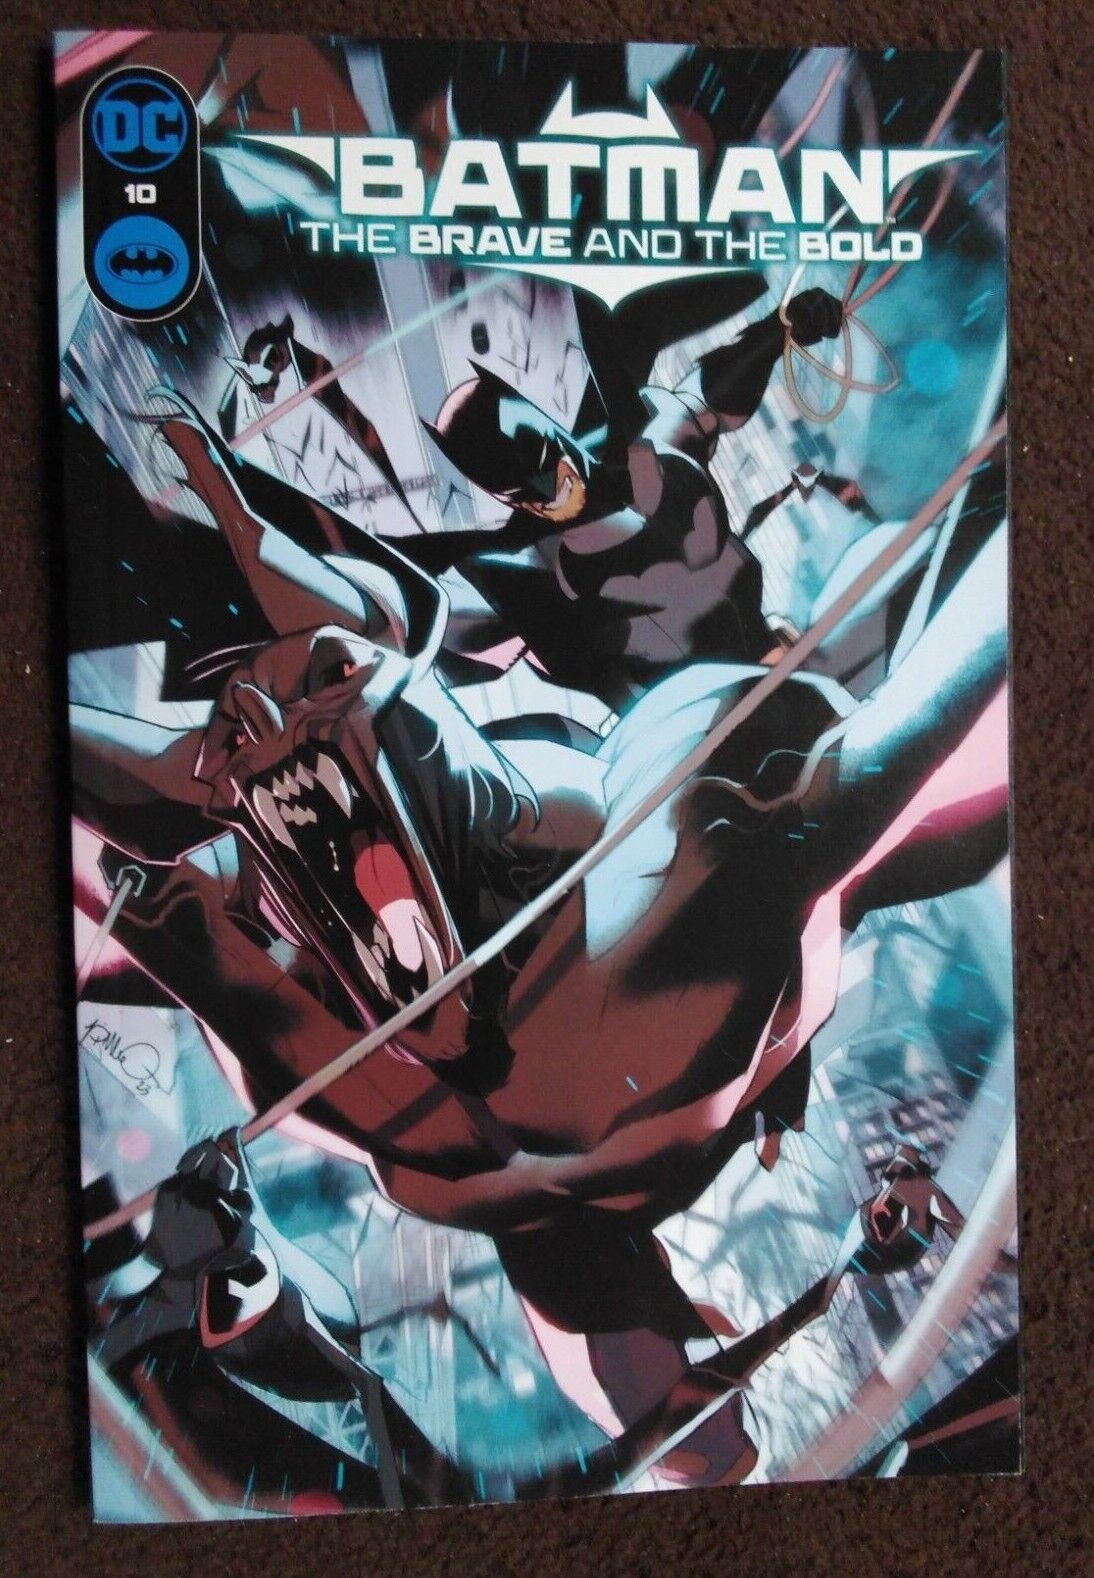 BATMAN BRAVE AND THE BOLD #10-14 DC NEW COMIC SERIES PICK CHOOSE YOUR COMIC